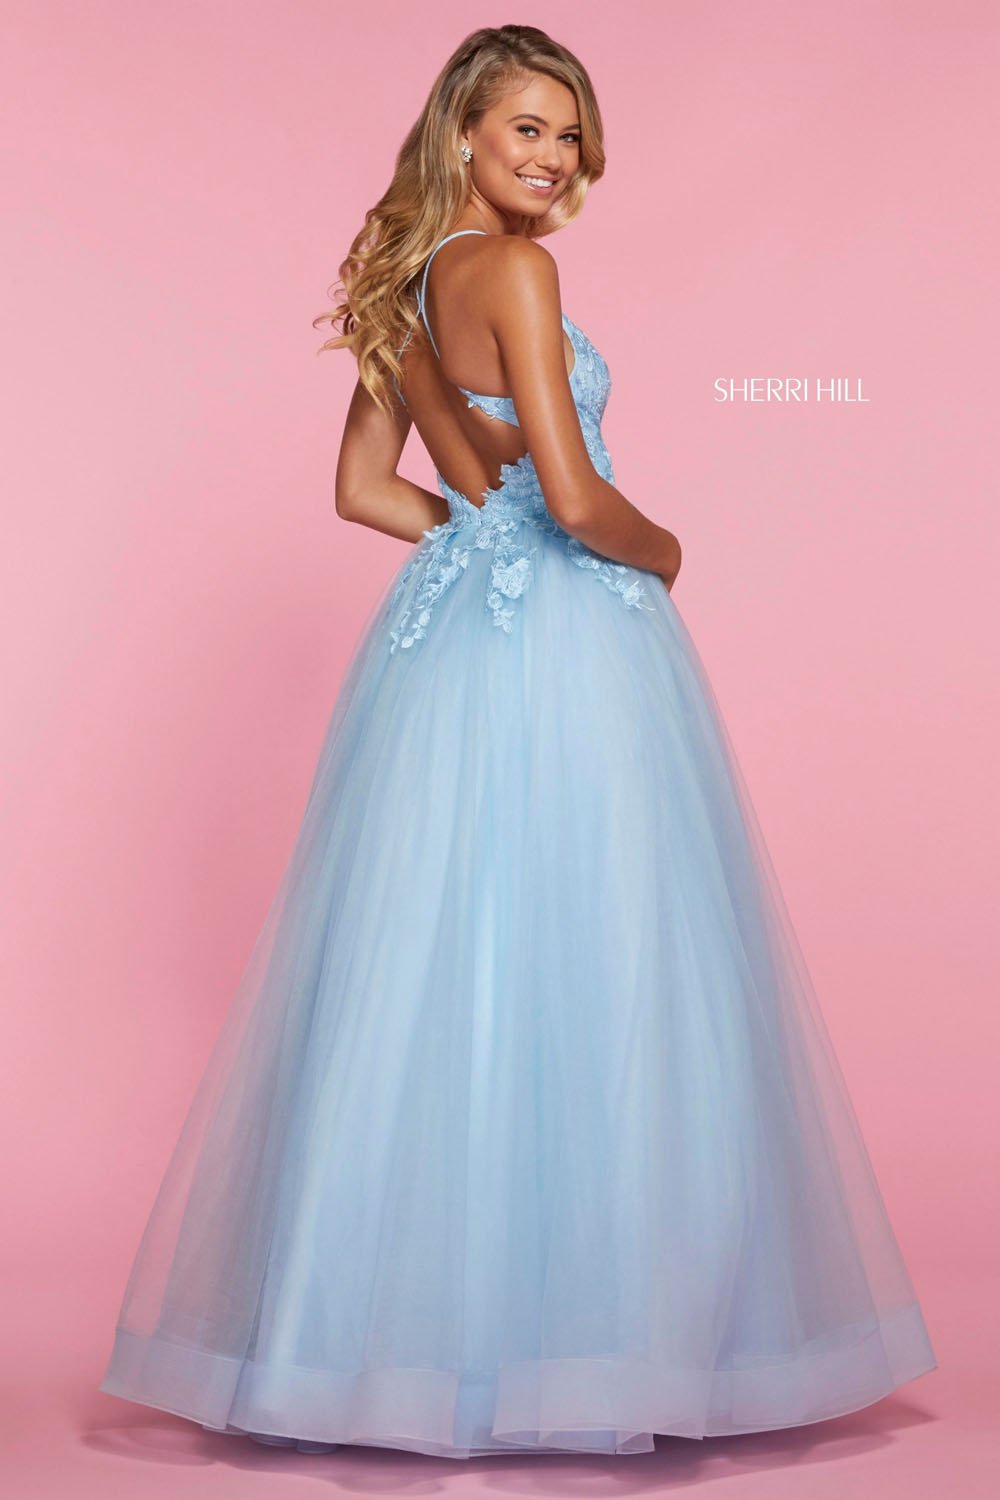 Sherri Hill 53411 dress images in these colors: Light Blue, Ivory.